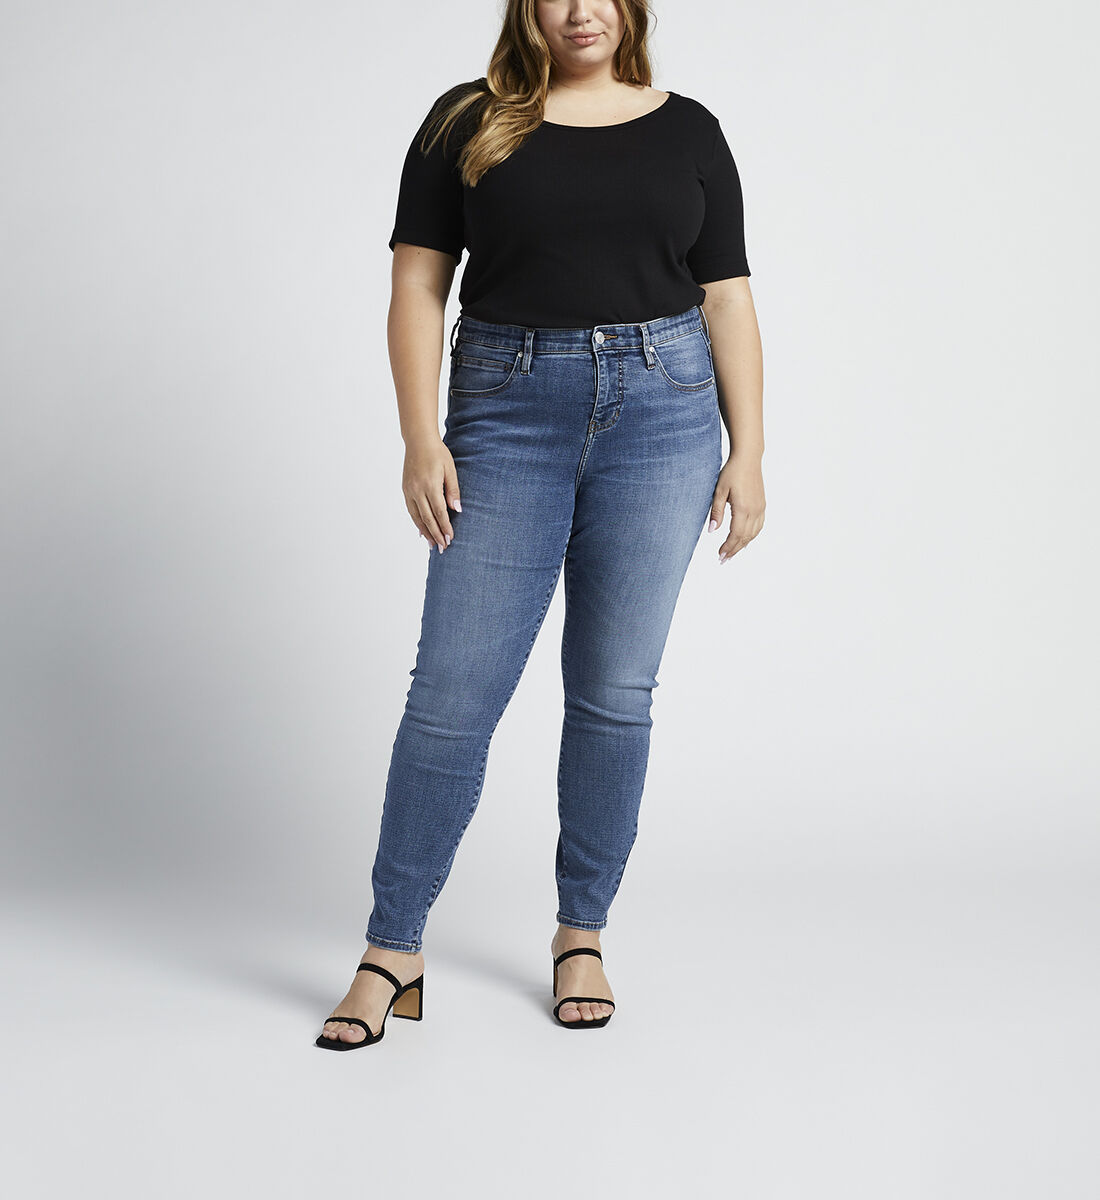 Cecilia Mid Rise Skinny Jeans Plus Size Front